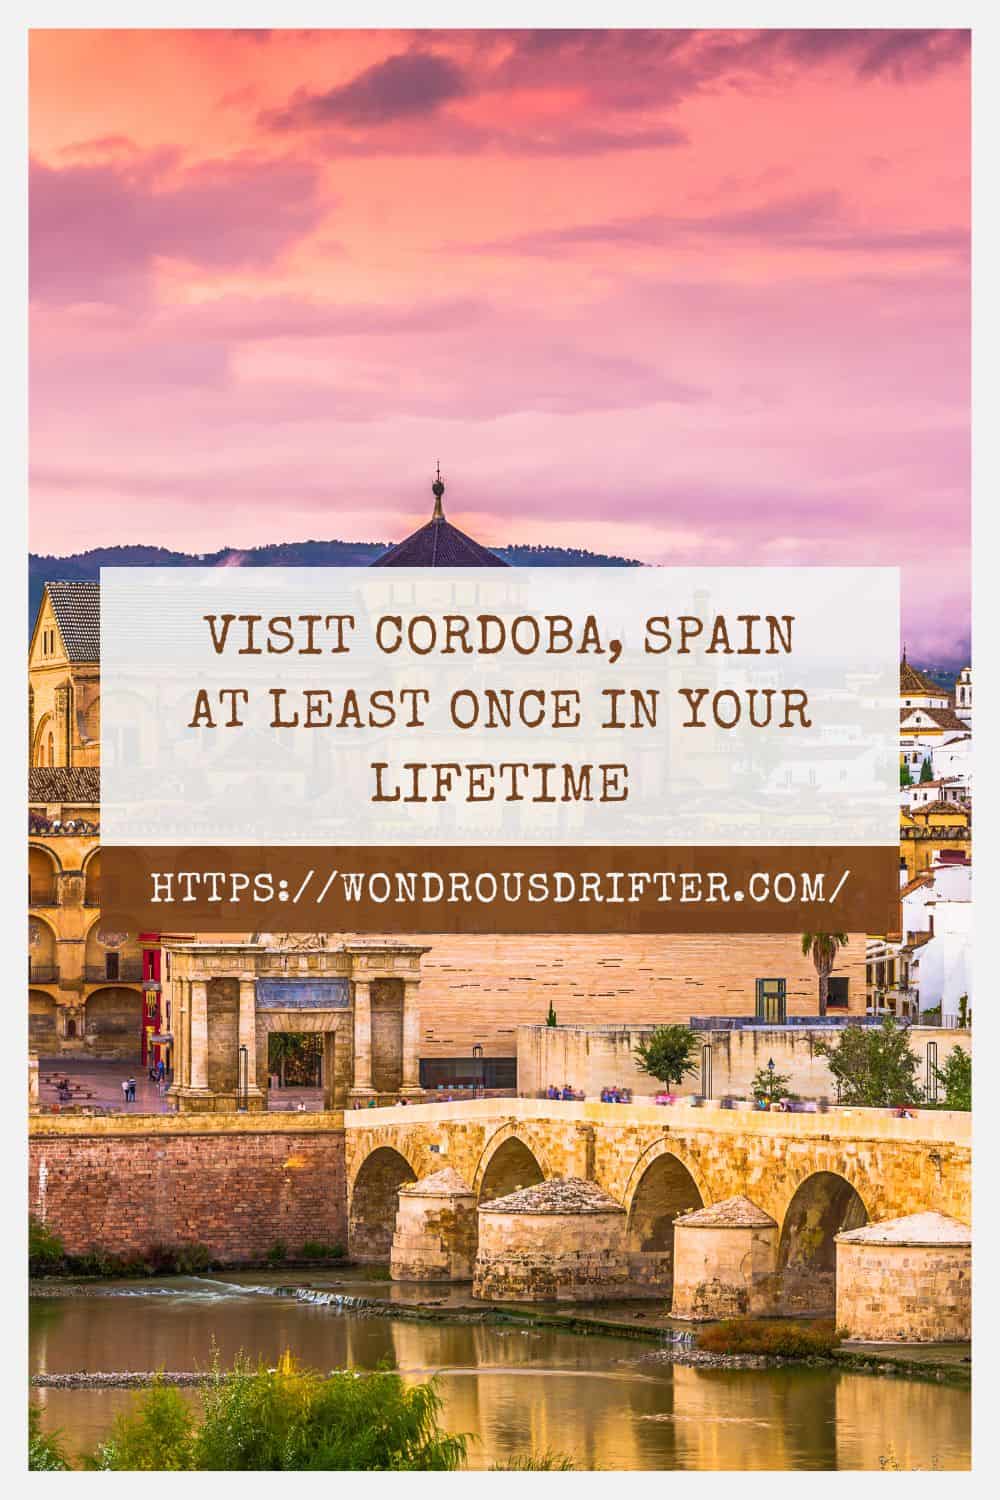 Visit Cordoba Spain at least once in your lifetime